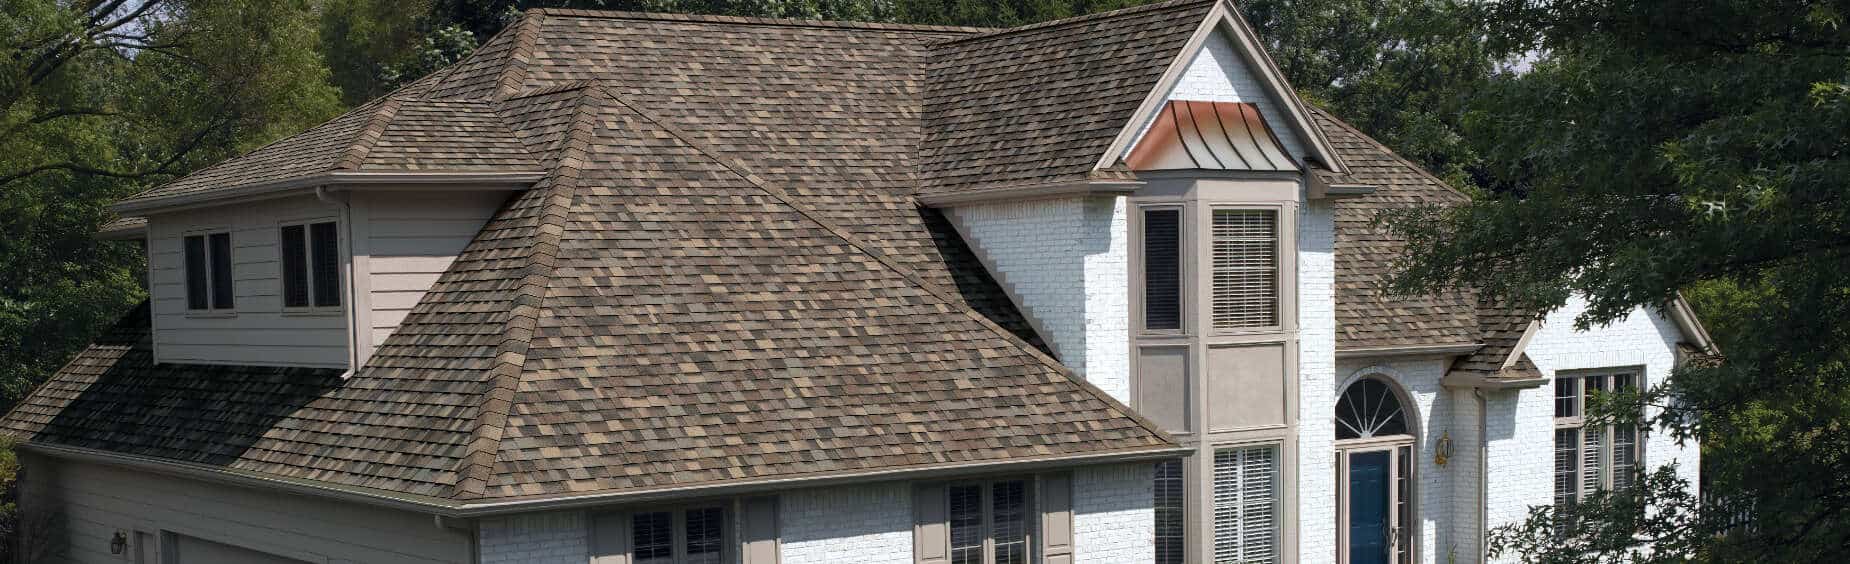 Syracuse, NY Roofing Services